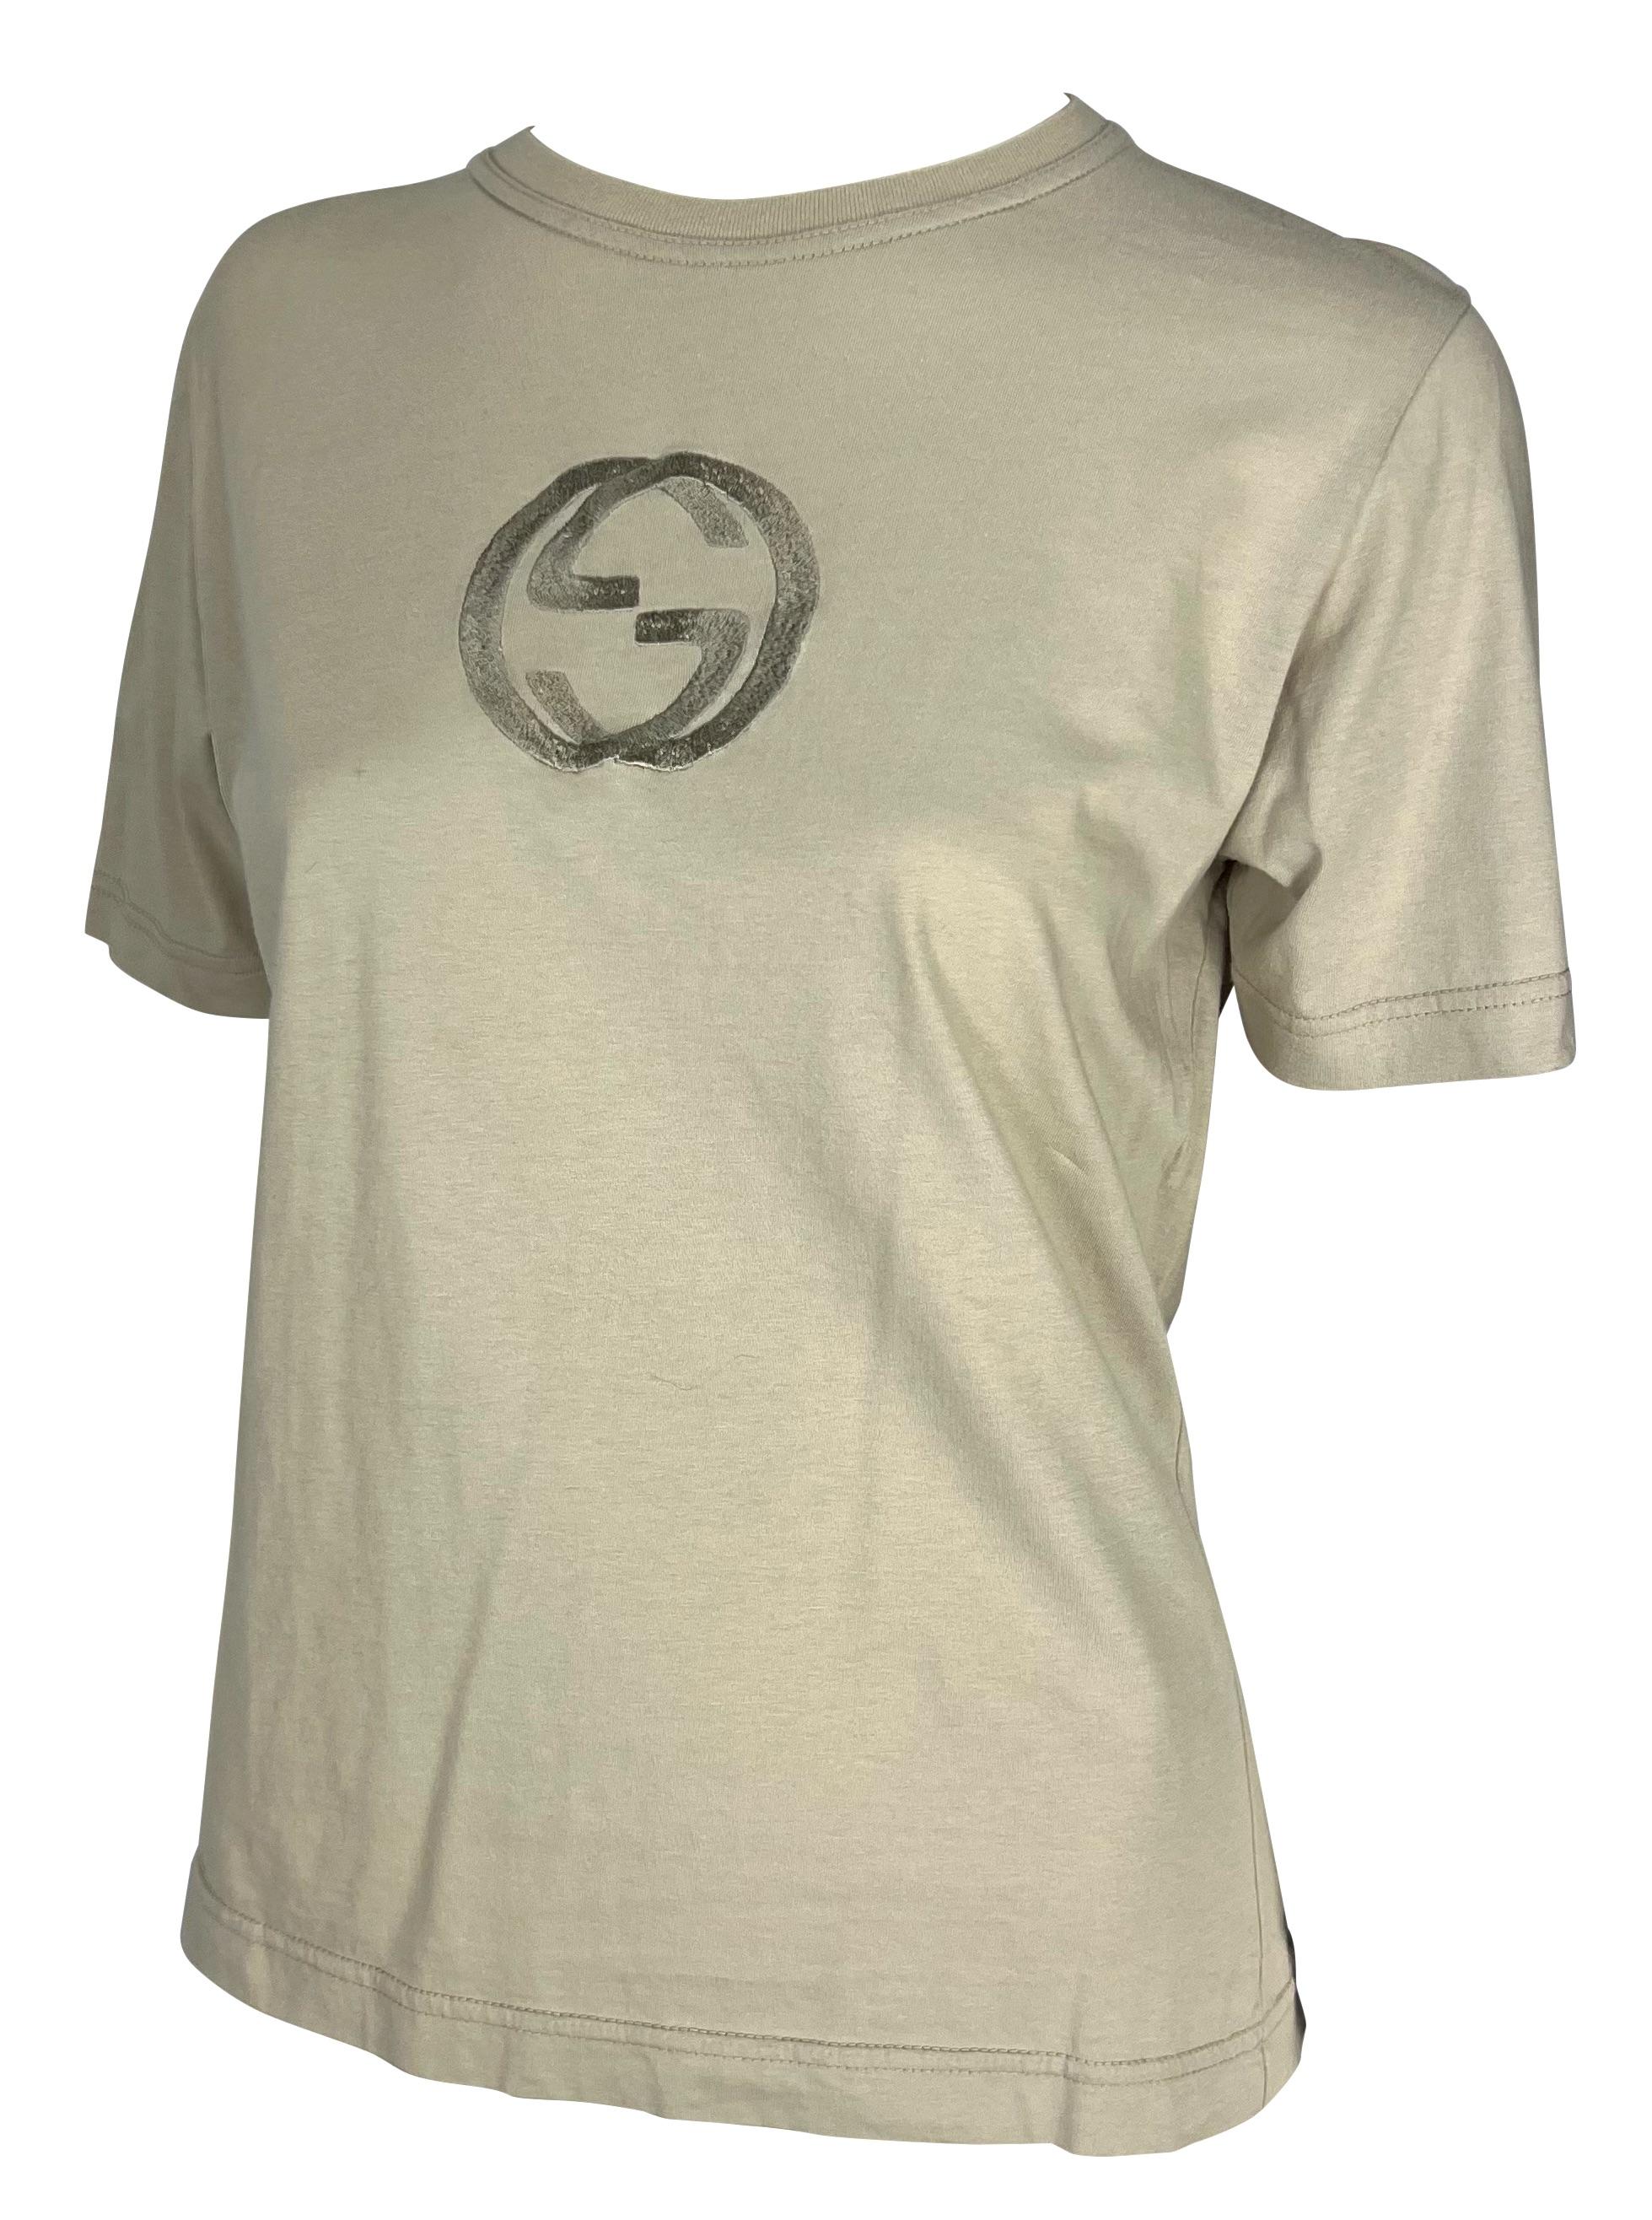 Presenting a taupe branded Gucci t-shirt, designed by Tom Ford. From the Spring/Summer 1997 collection, this classic crewneck t-shirt is perfectly elevated with a large embossed Gucci 'GG' logo at the chest. This unisex t-shirt has the perfect Gucci